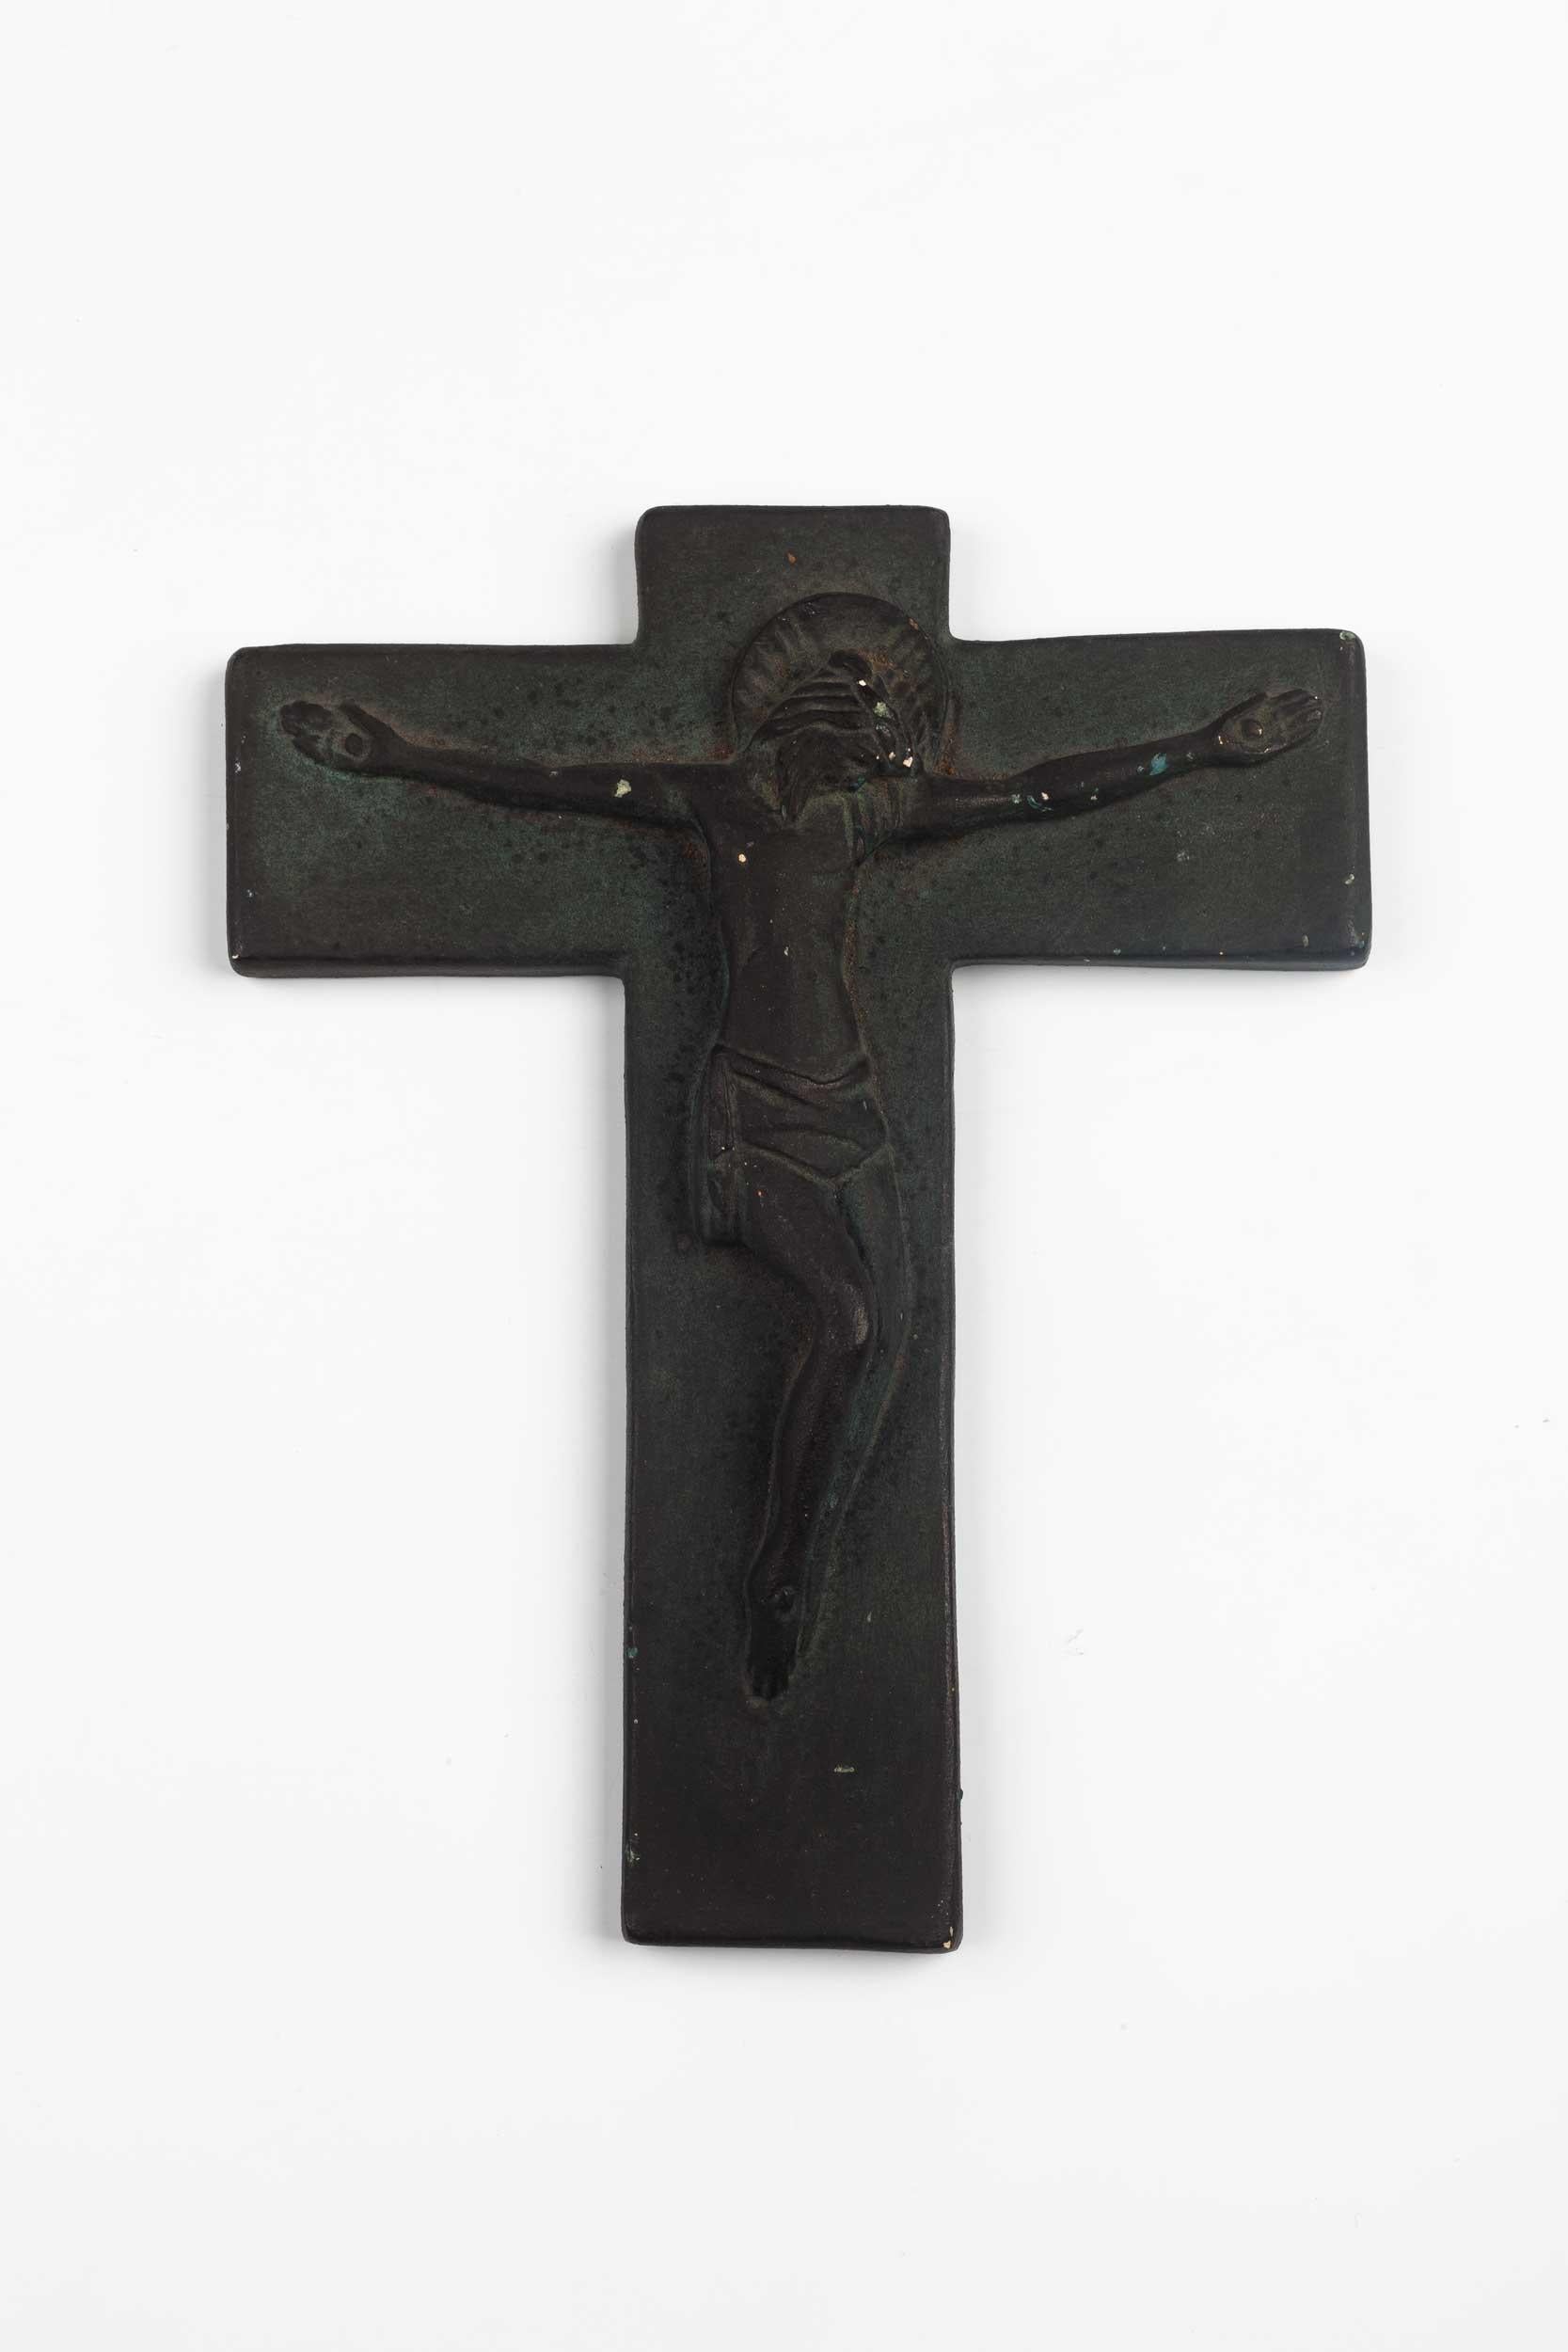 Belgian wall cross in matte black, hand painted ceramic with halo-ish Christ figure in volume.

From modernism to brutalism, the crosses in our collection range from being as futurist as a modernist church to as raw as a brutalist building. Each